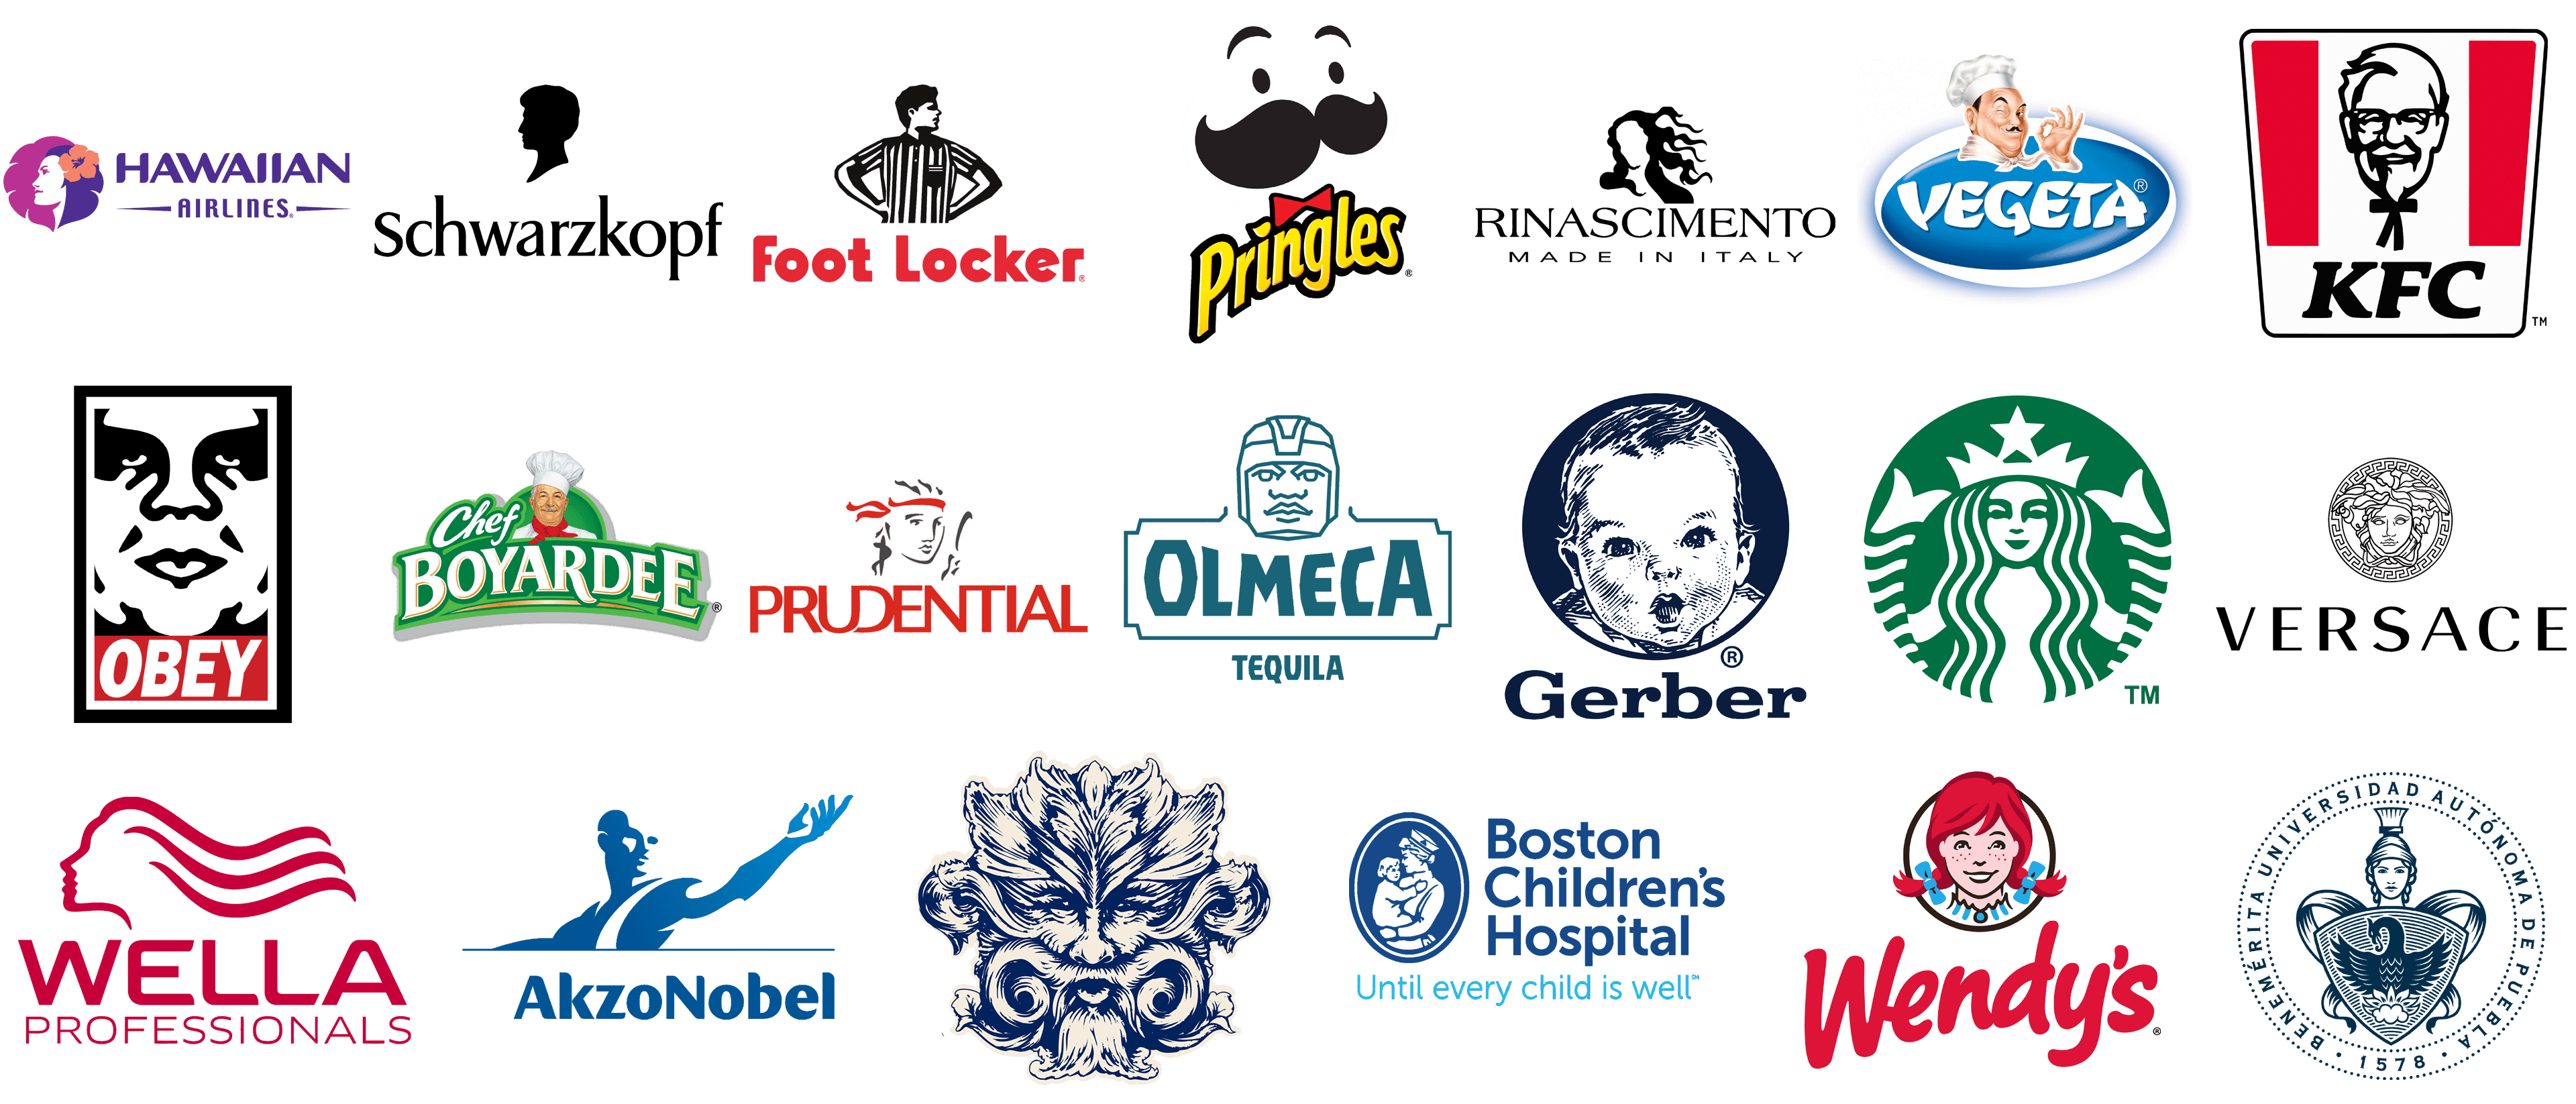 Brands and logos